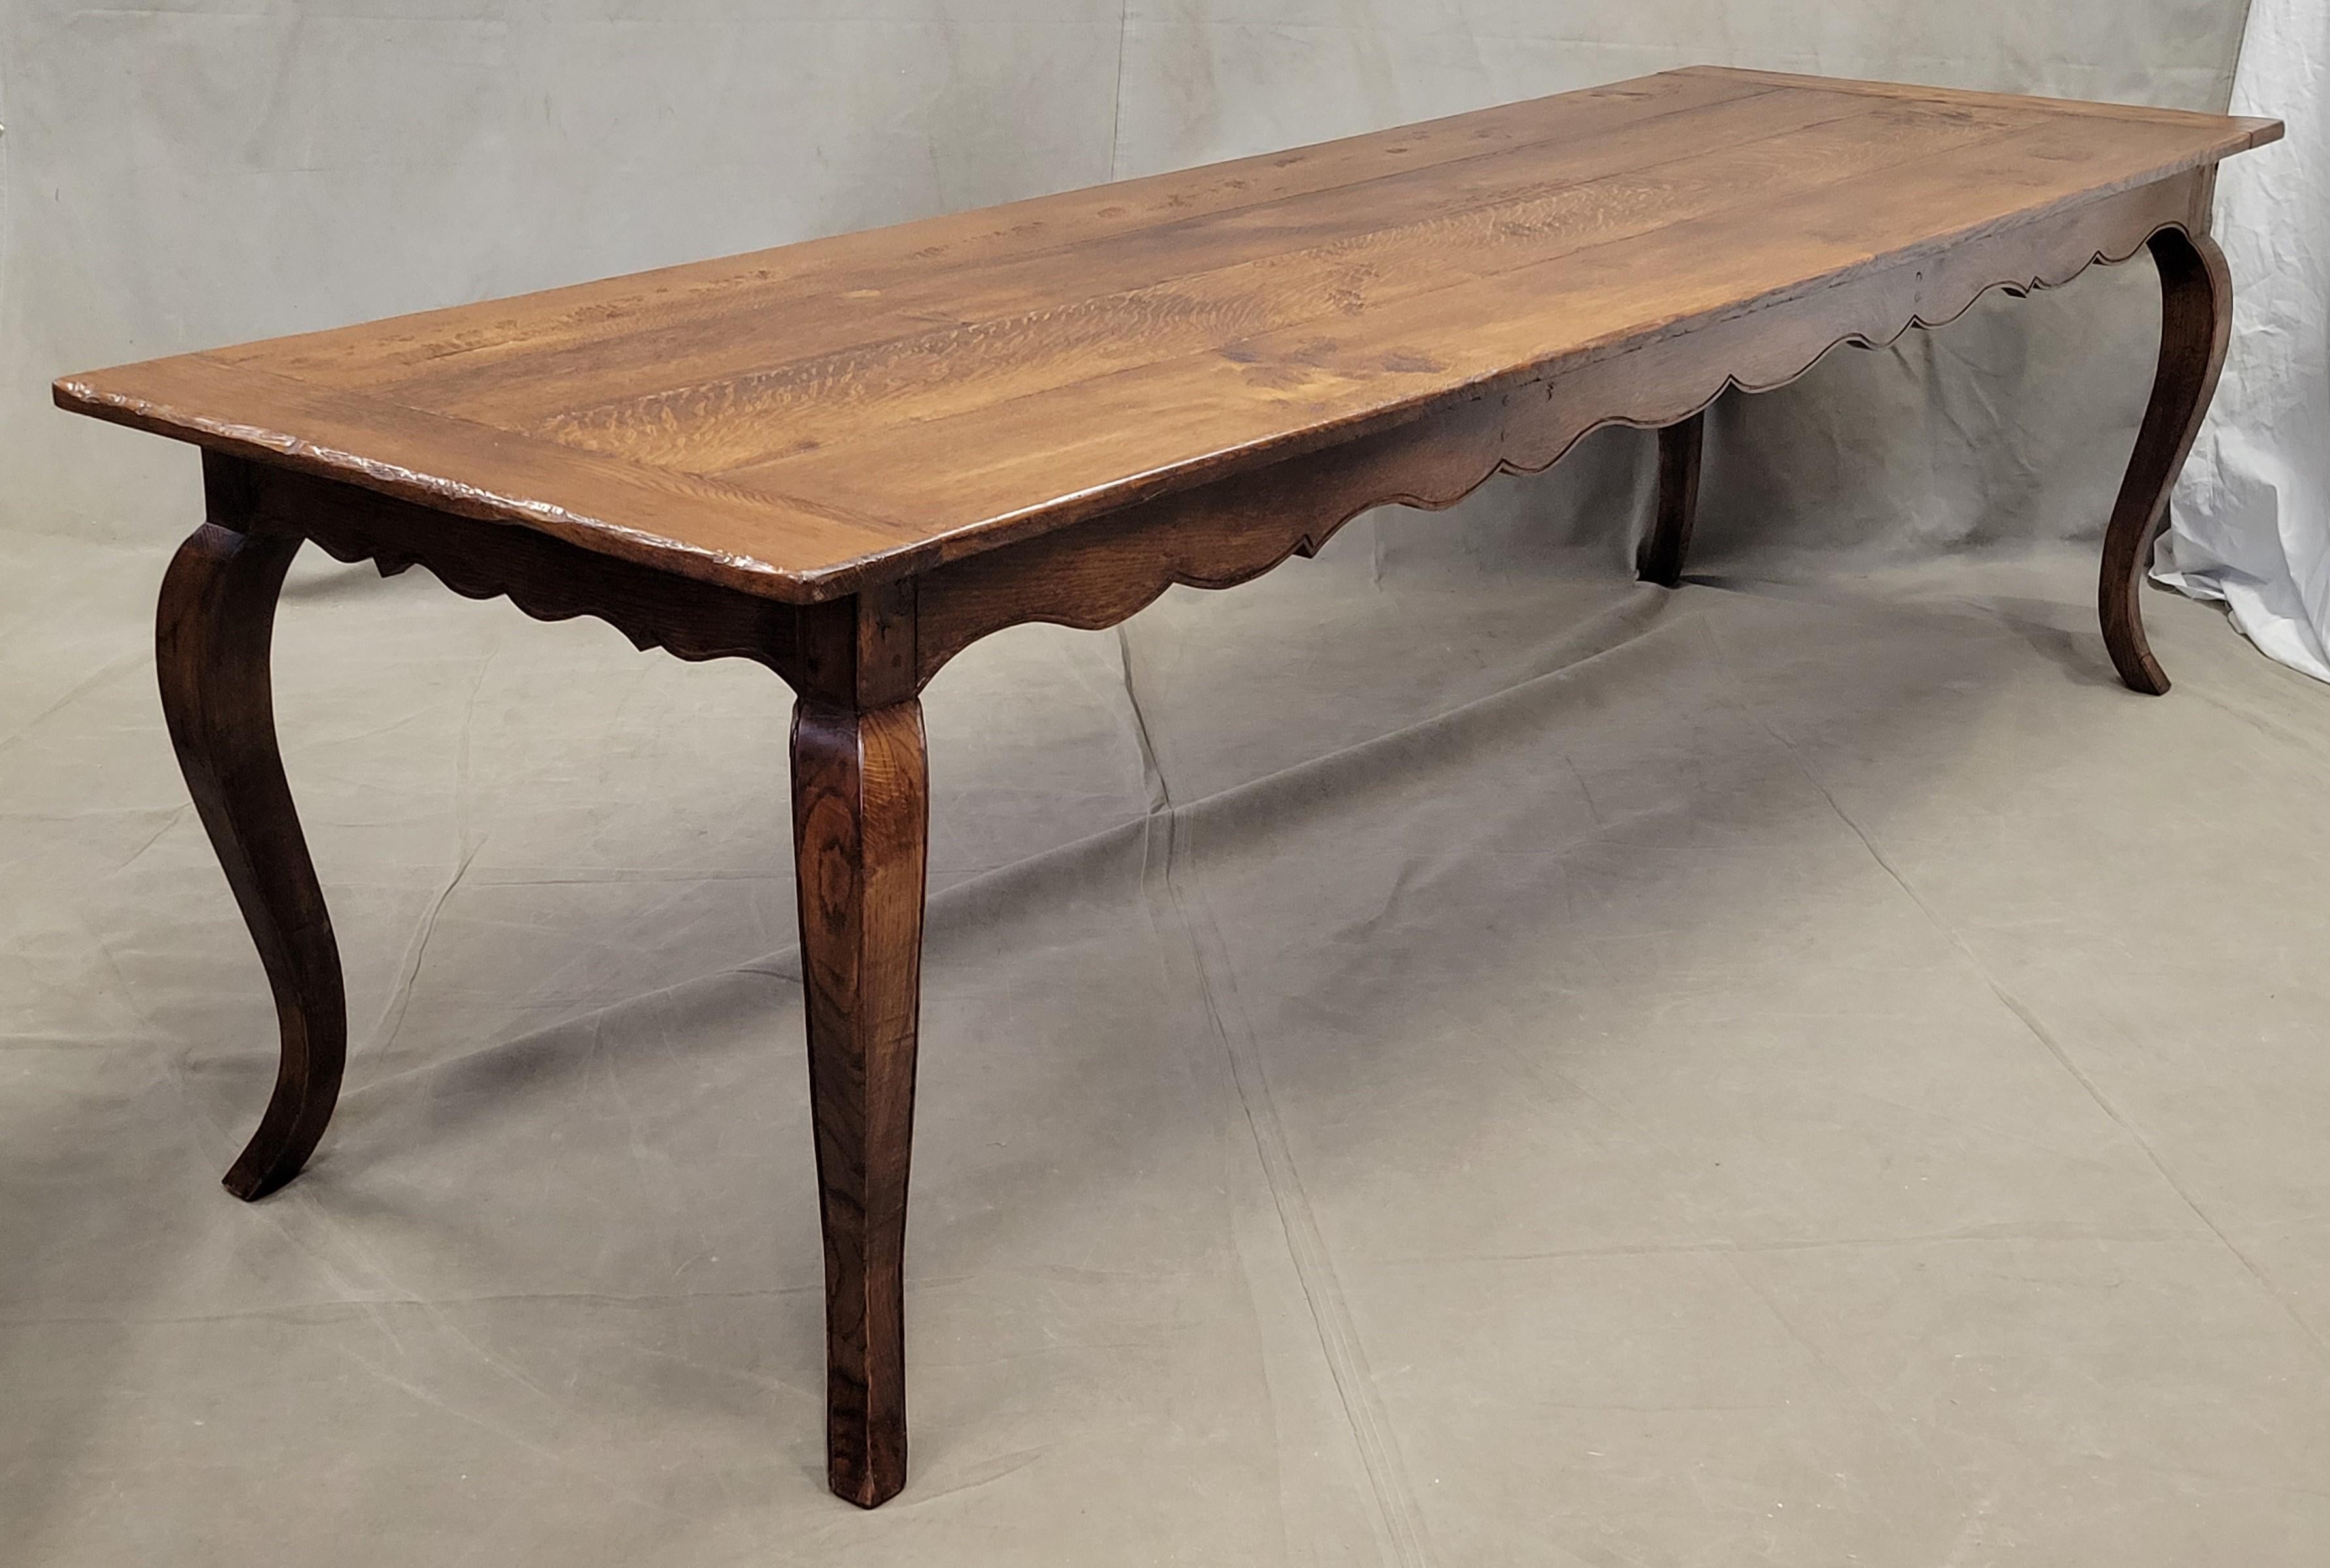 A monumental, elegant vintage custom-made 9' long French oak farmhouse dining table with Louis XV lines. An absolutely gorgeous hand-made table created (likely in the 1990s) out of old lumber that seats 10 comfortably. A perfect blend of rustic,